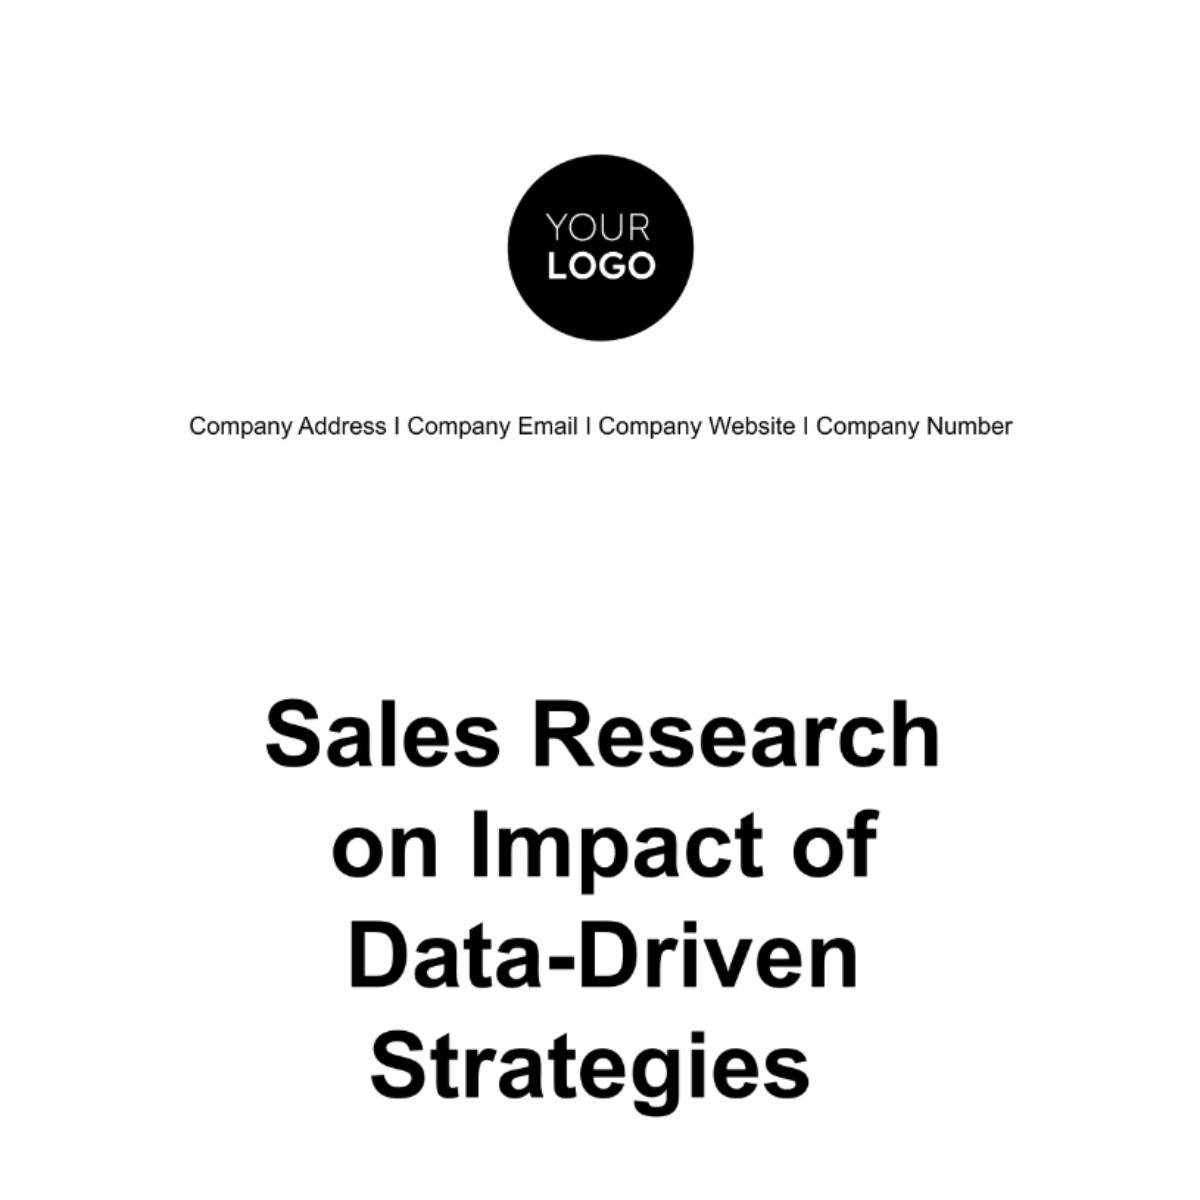 Free Sales Research on Impact of Data-Driven Strategies Template